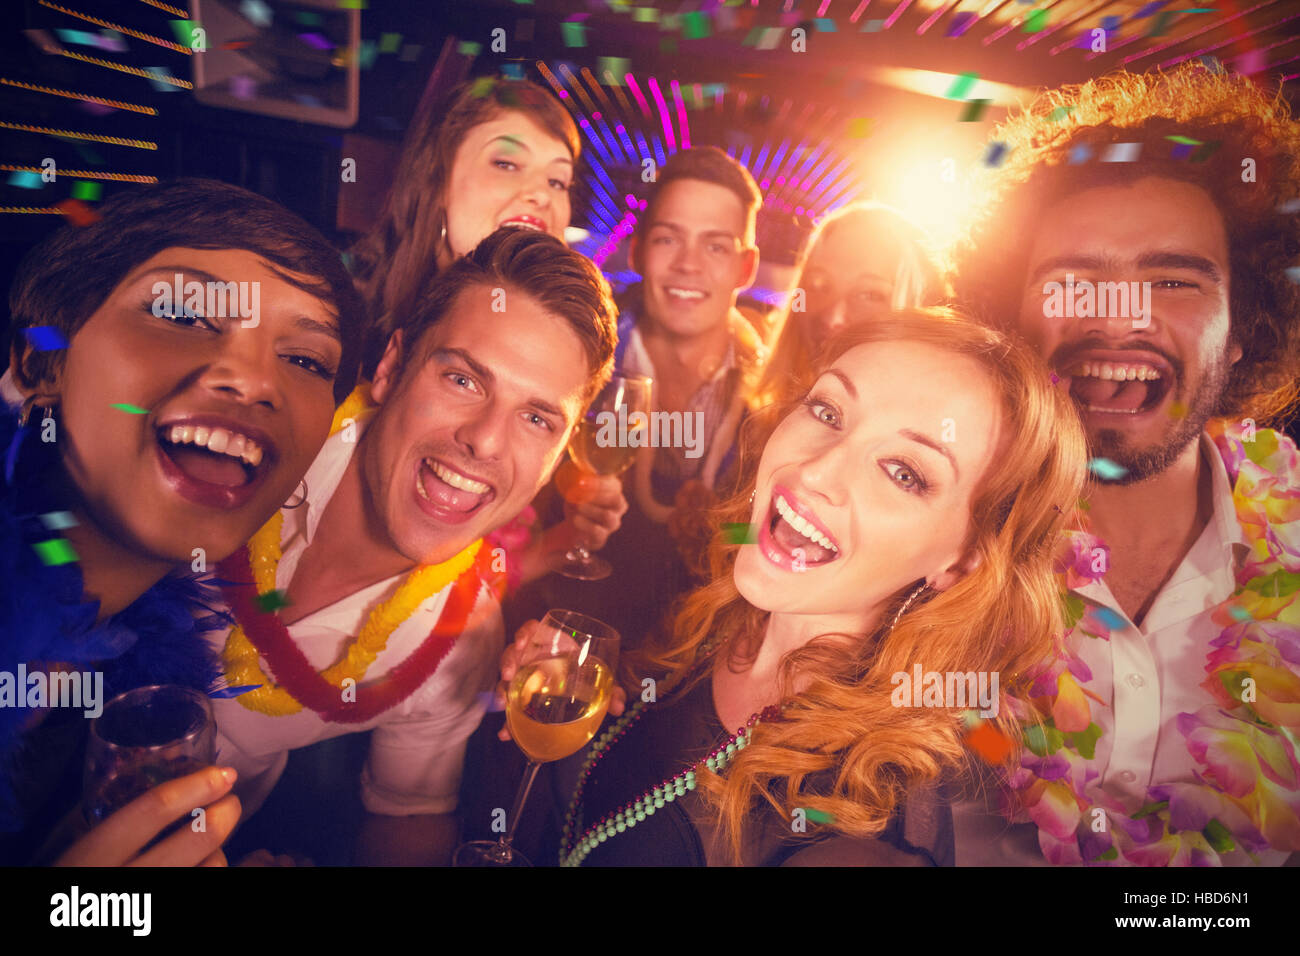 Composite image of group of friends having fun in bar Stock Photo